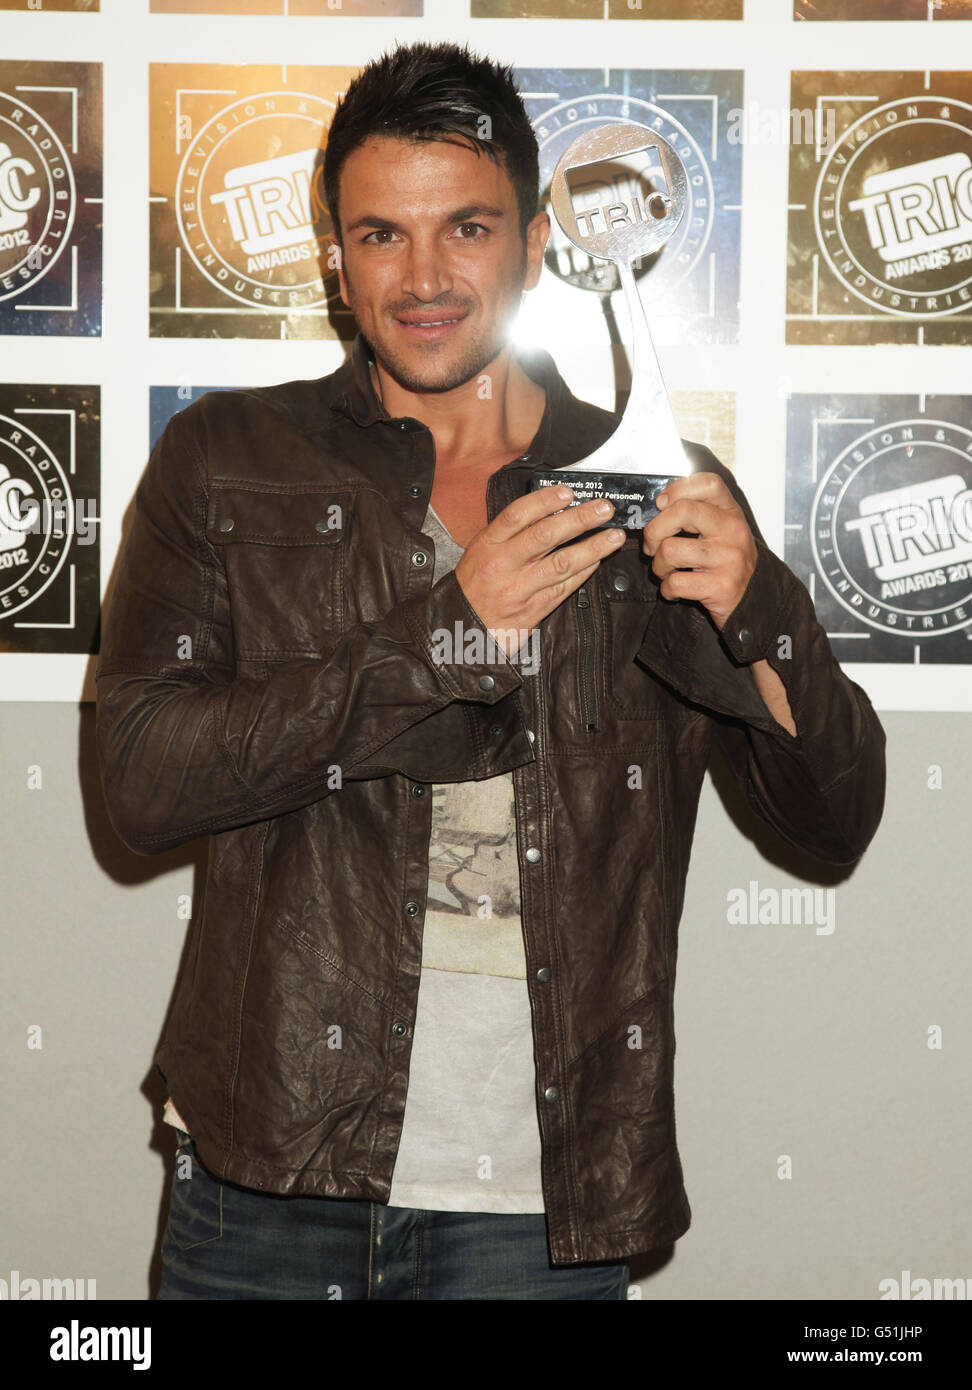 Peter Andre with his Satellite/Digital TV Personality award during the Television and Radio Industries Club (TRIC) Awards, at Grosvenor House Hotel on Park Lane, central London. Stock Photo